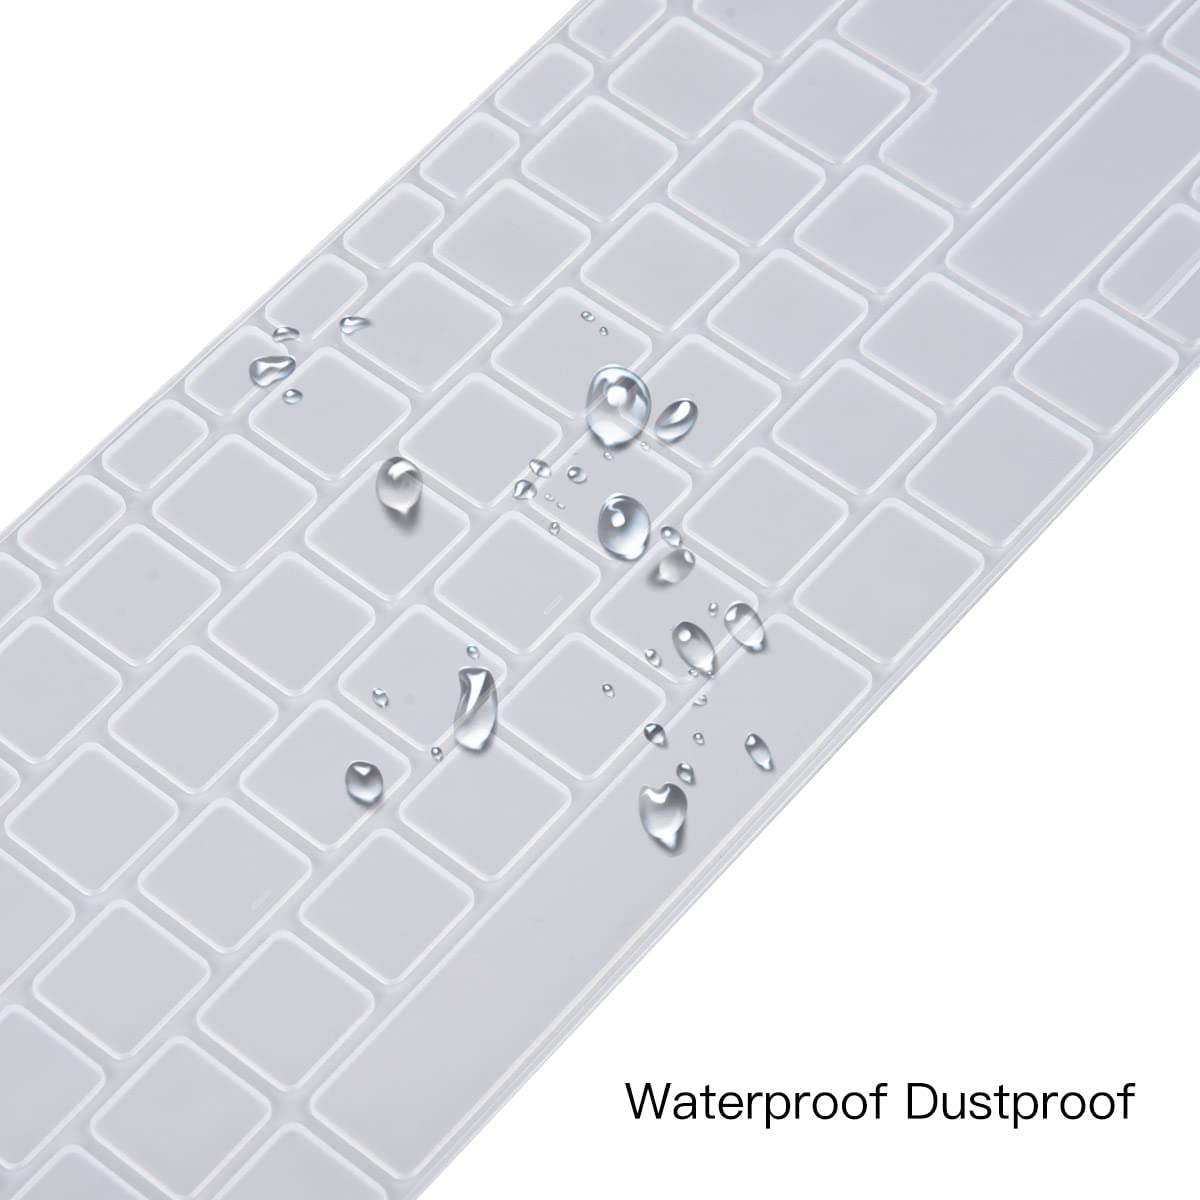 Silicon Keyboard Skin Cover for Acer Aspire 7 15.6